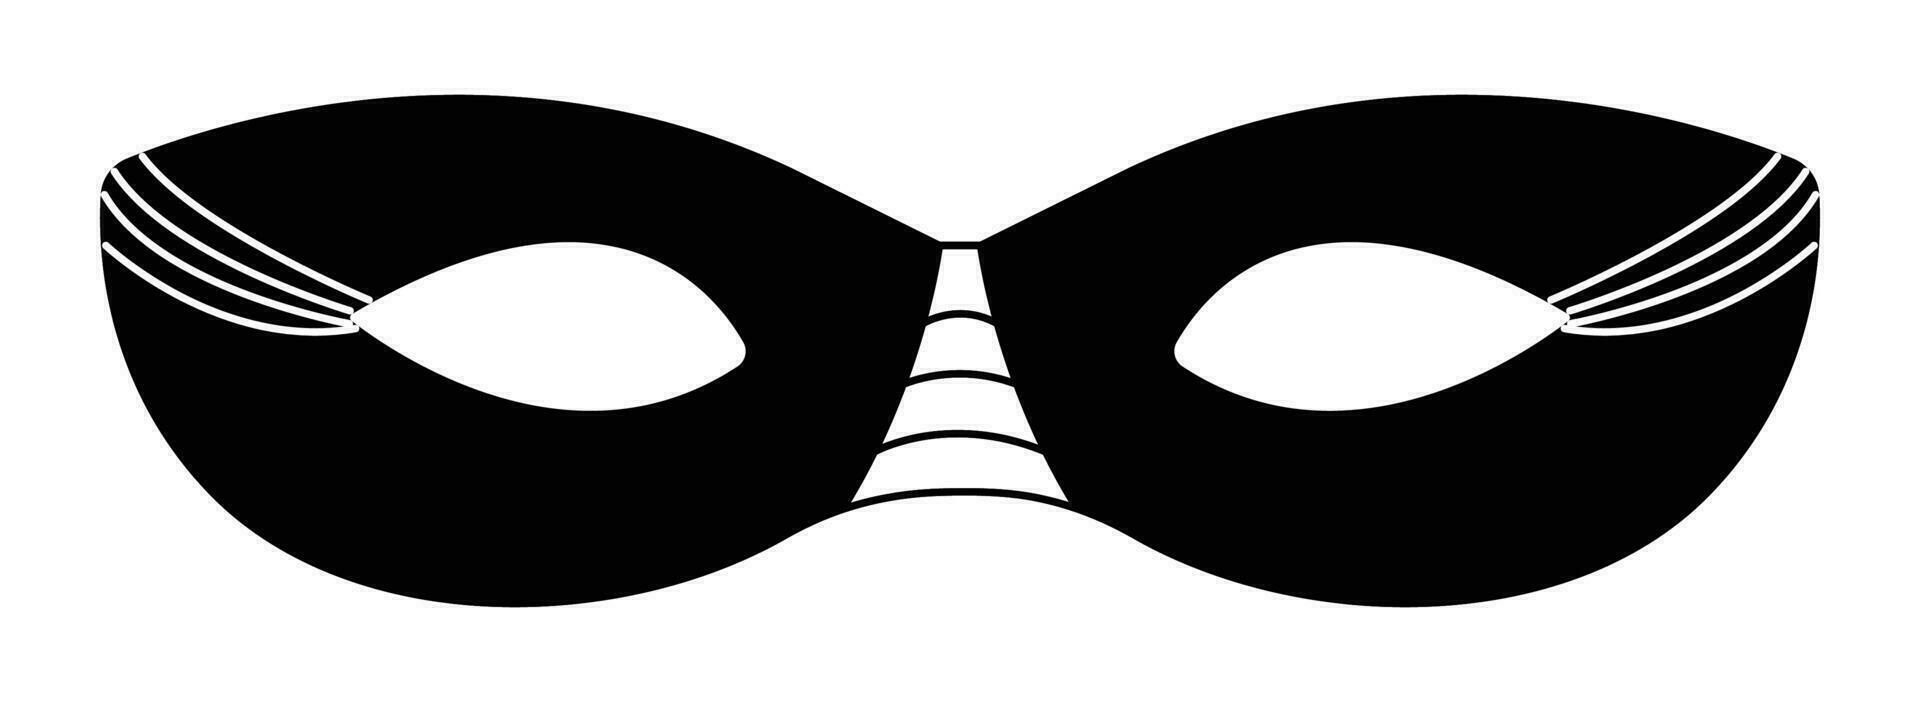 Black and white simple eye masquerade mask, vector simplified attribute of a carnival costume